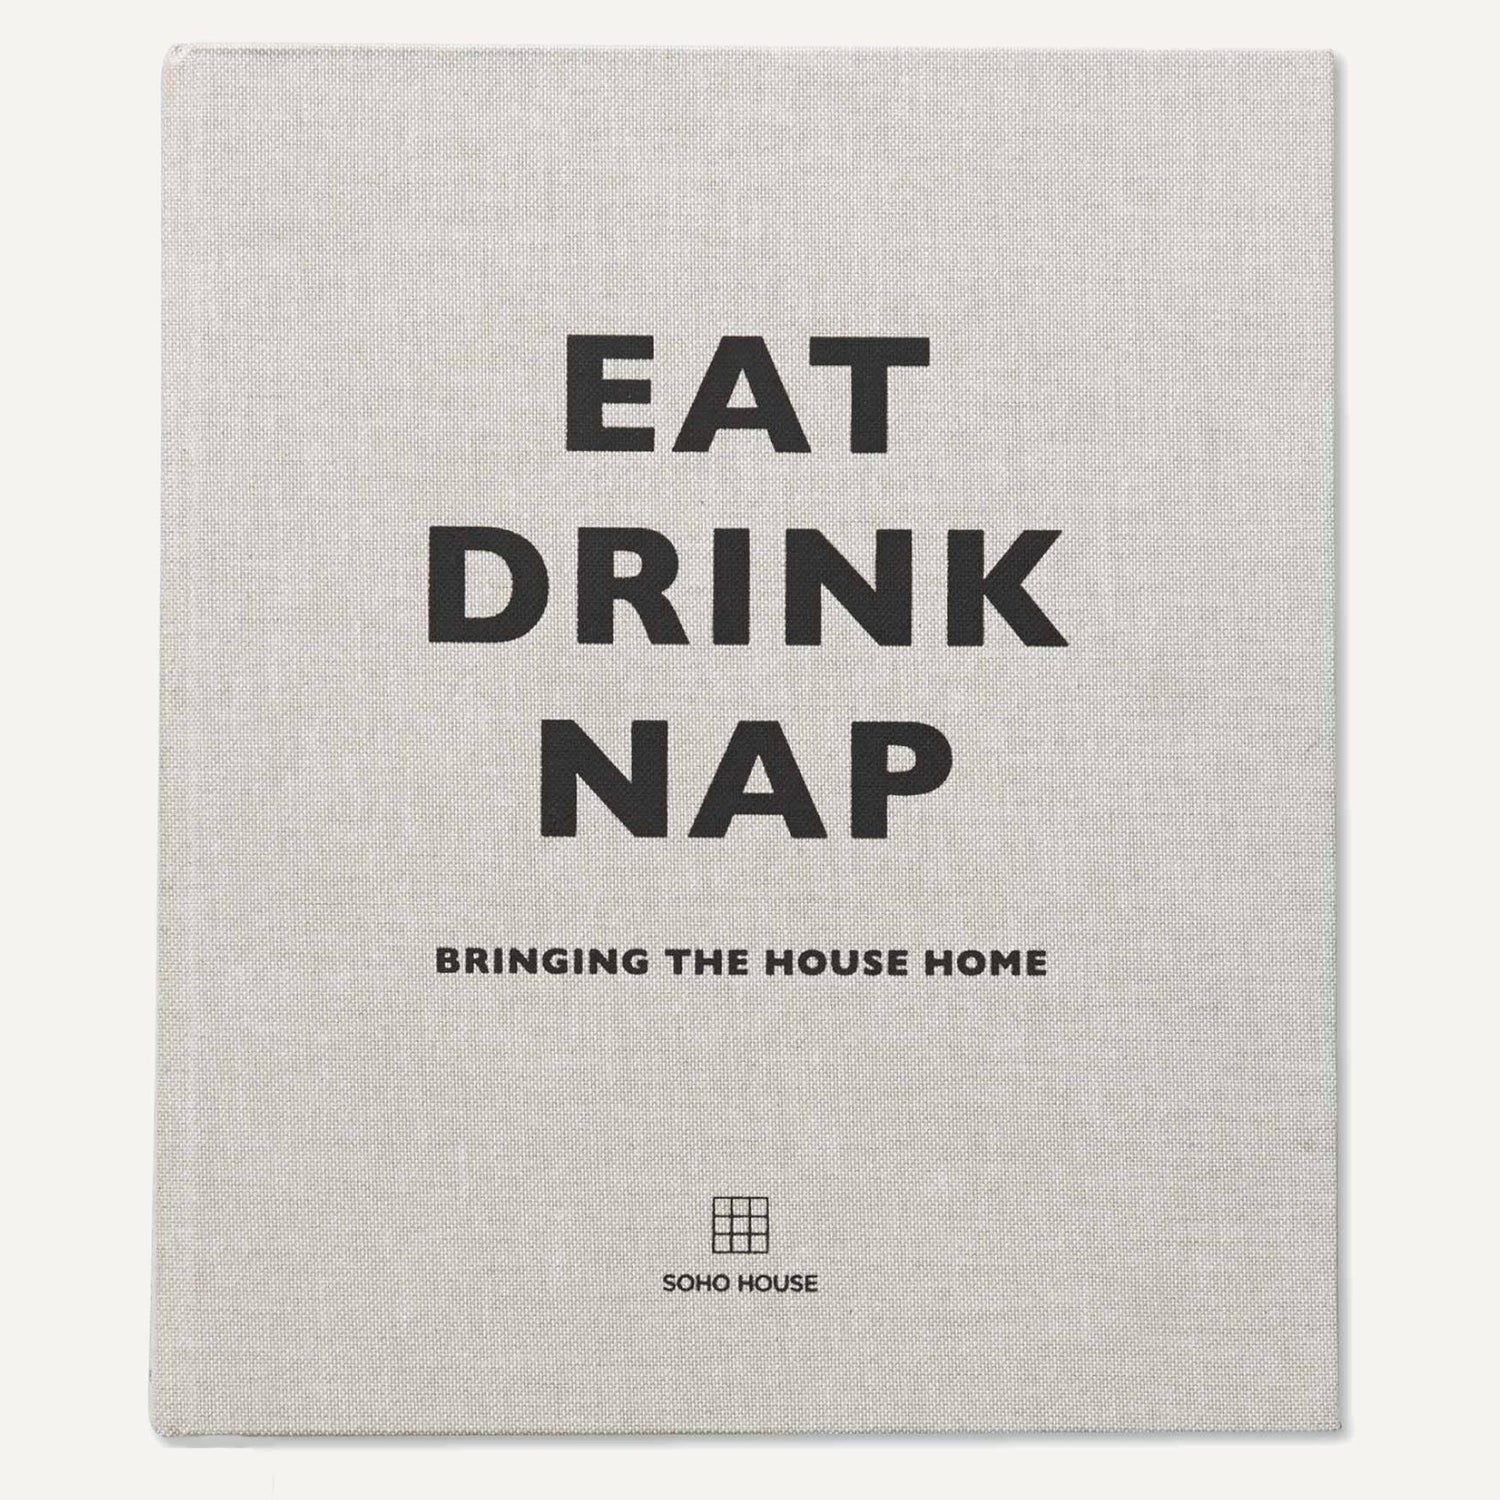 Eat Drink Nap - Bringing The House Home Book by Soho House